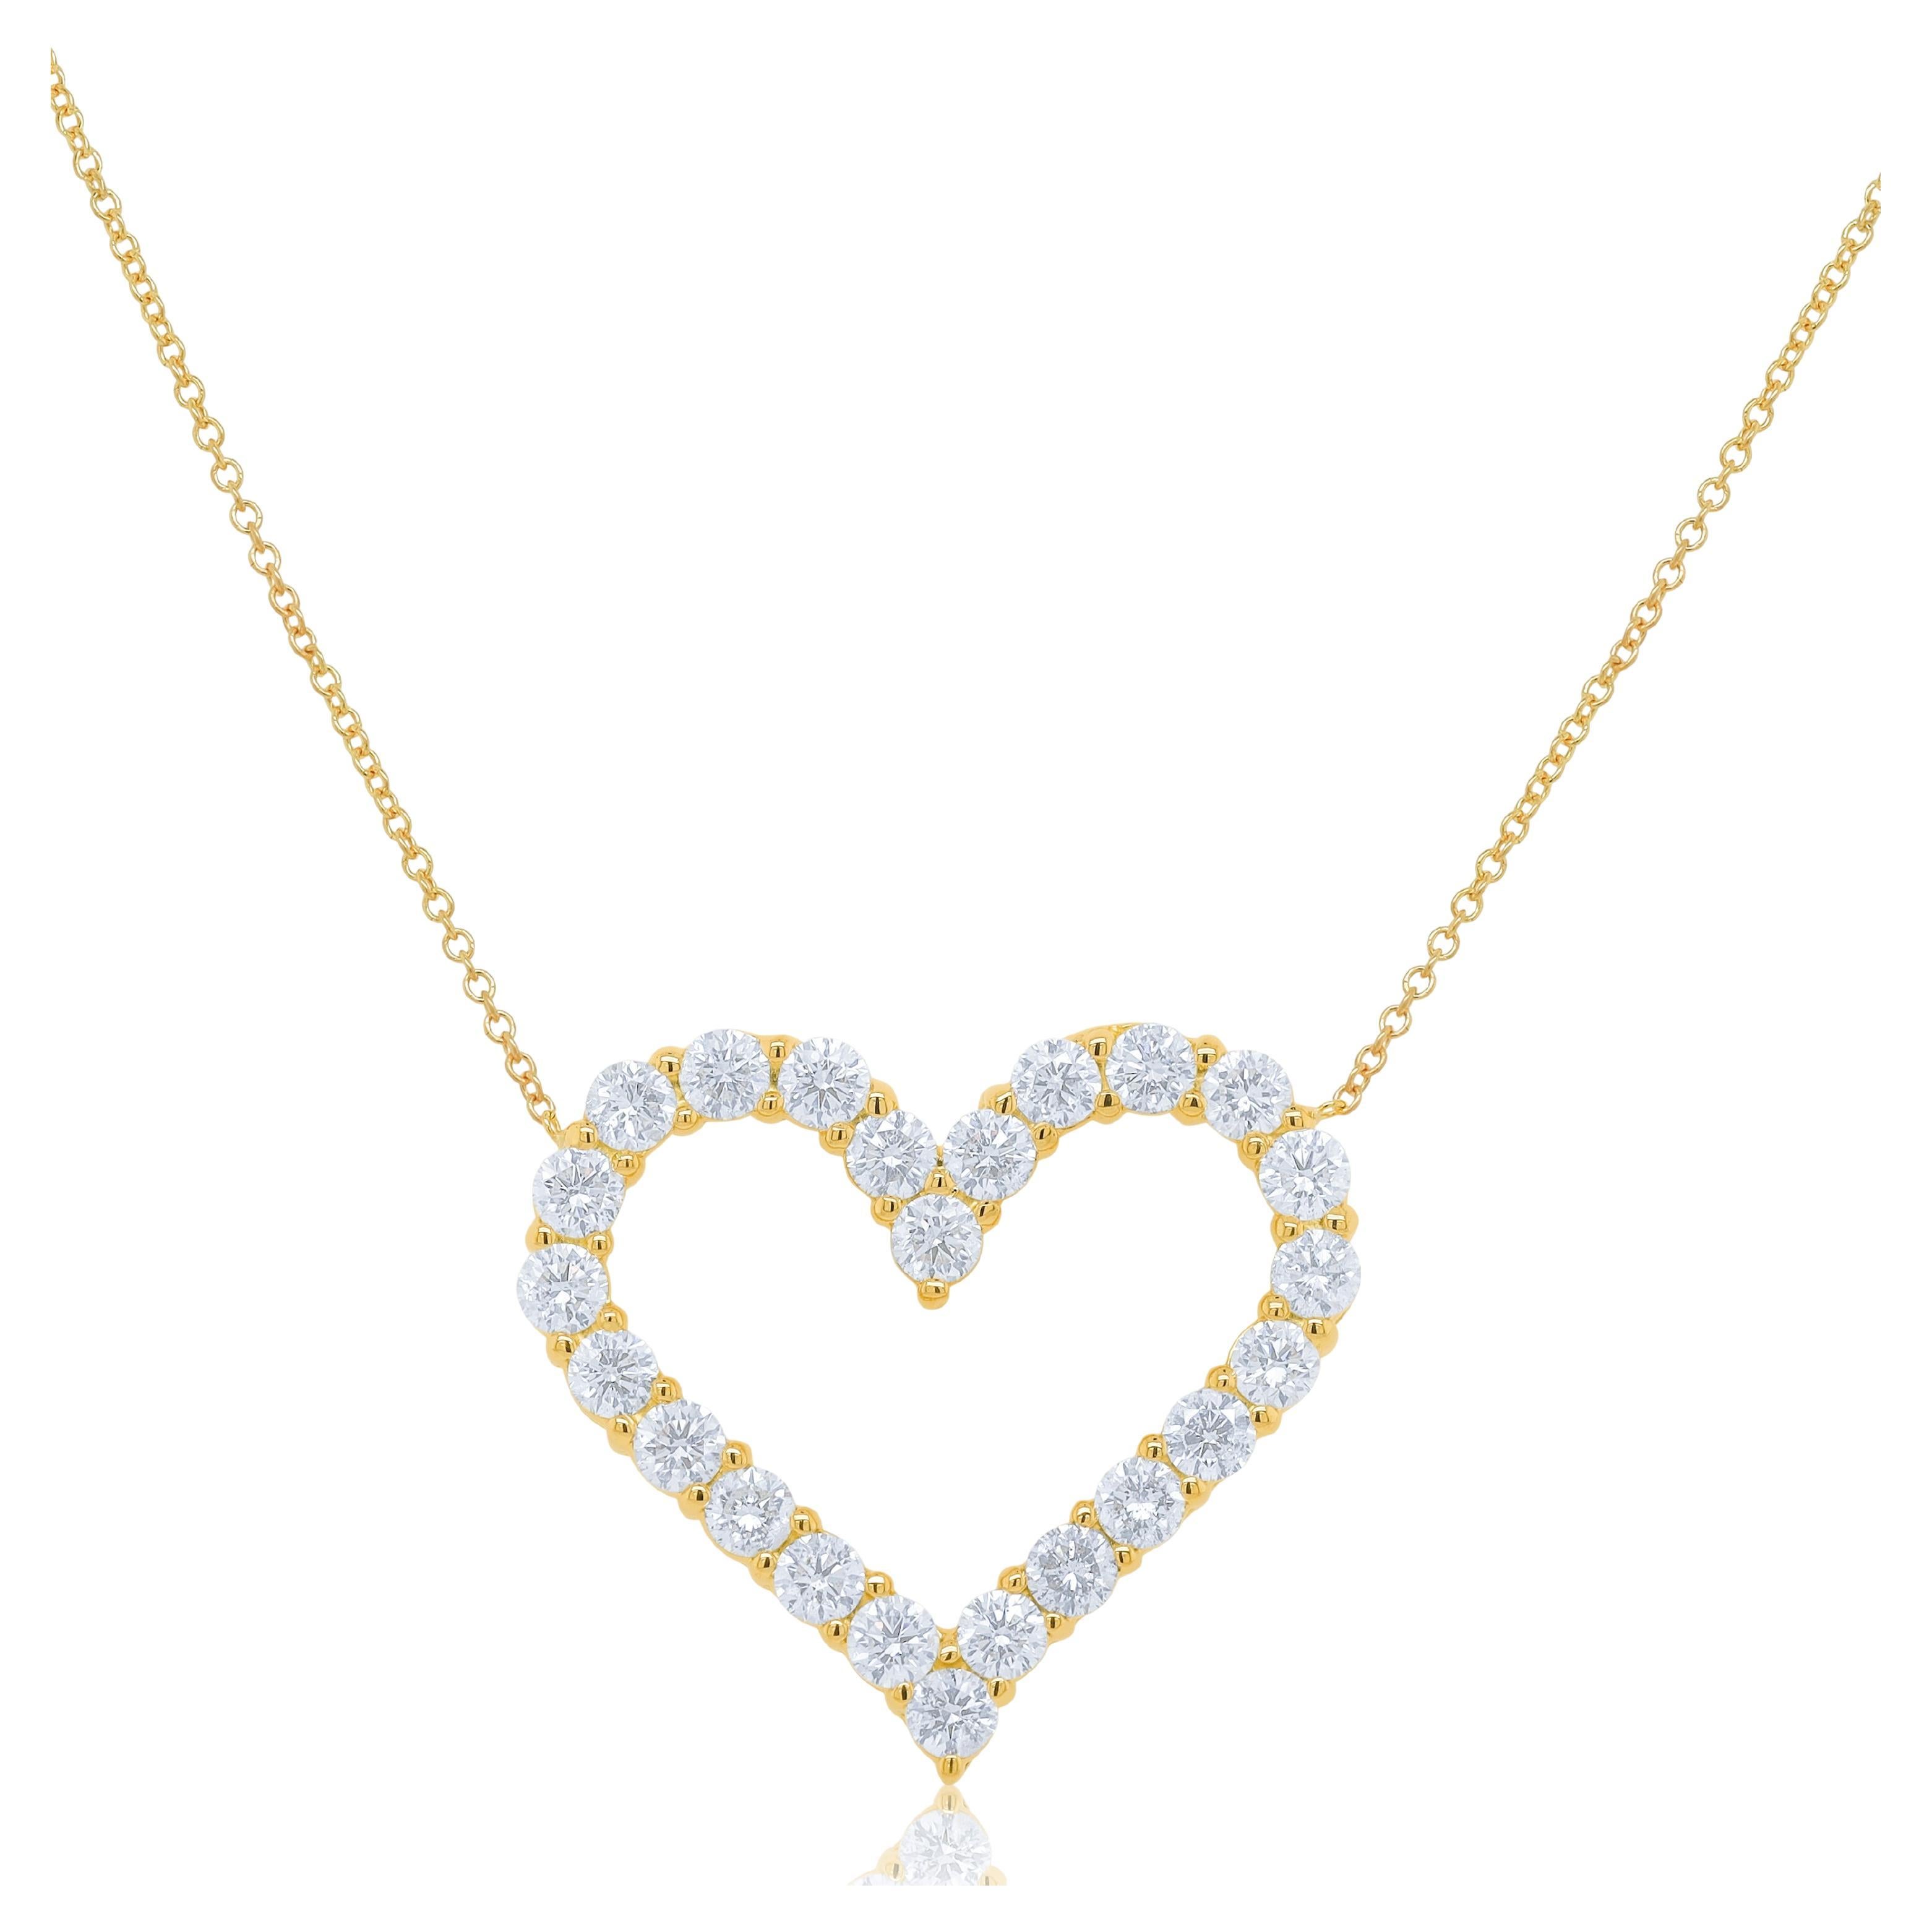 Diana M. 18kt yellow gold open heart pendant featuring 2.50 cts of round diamond